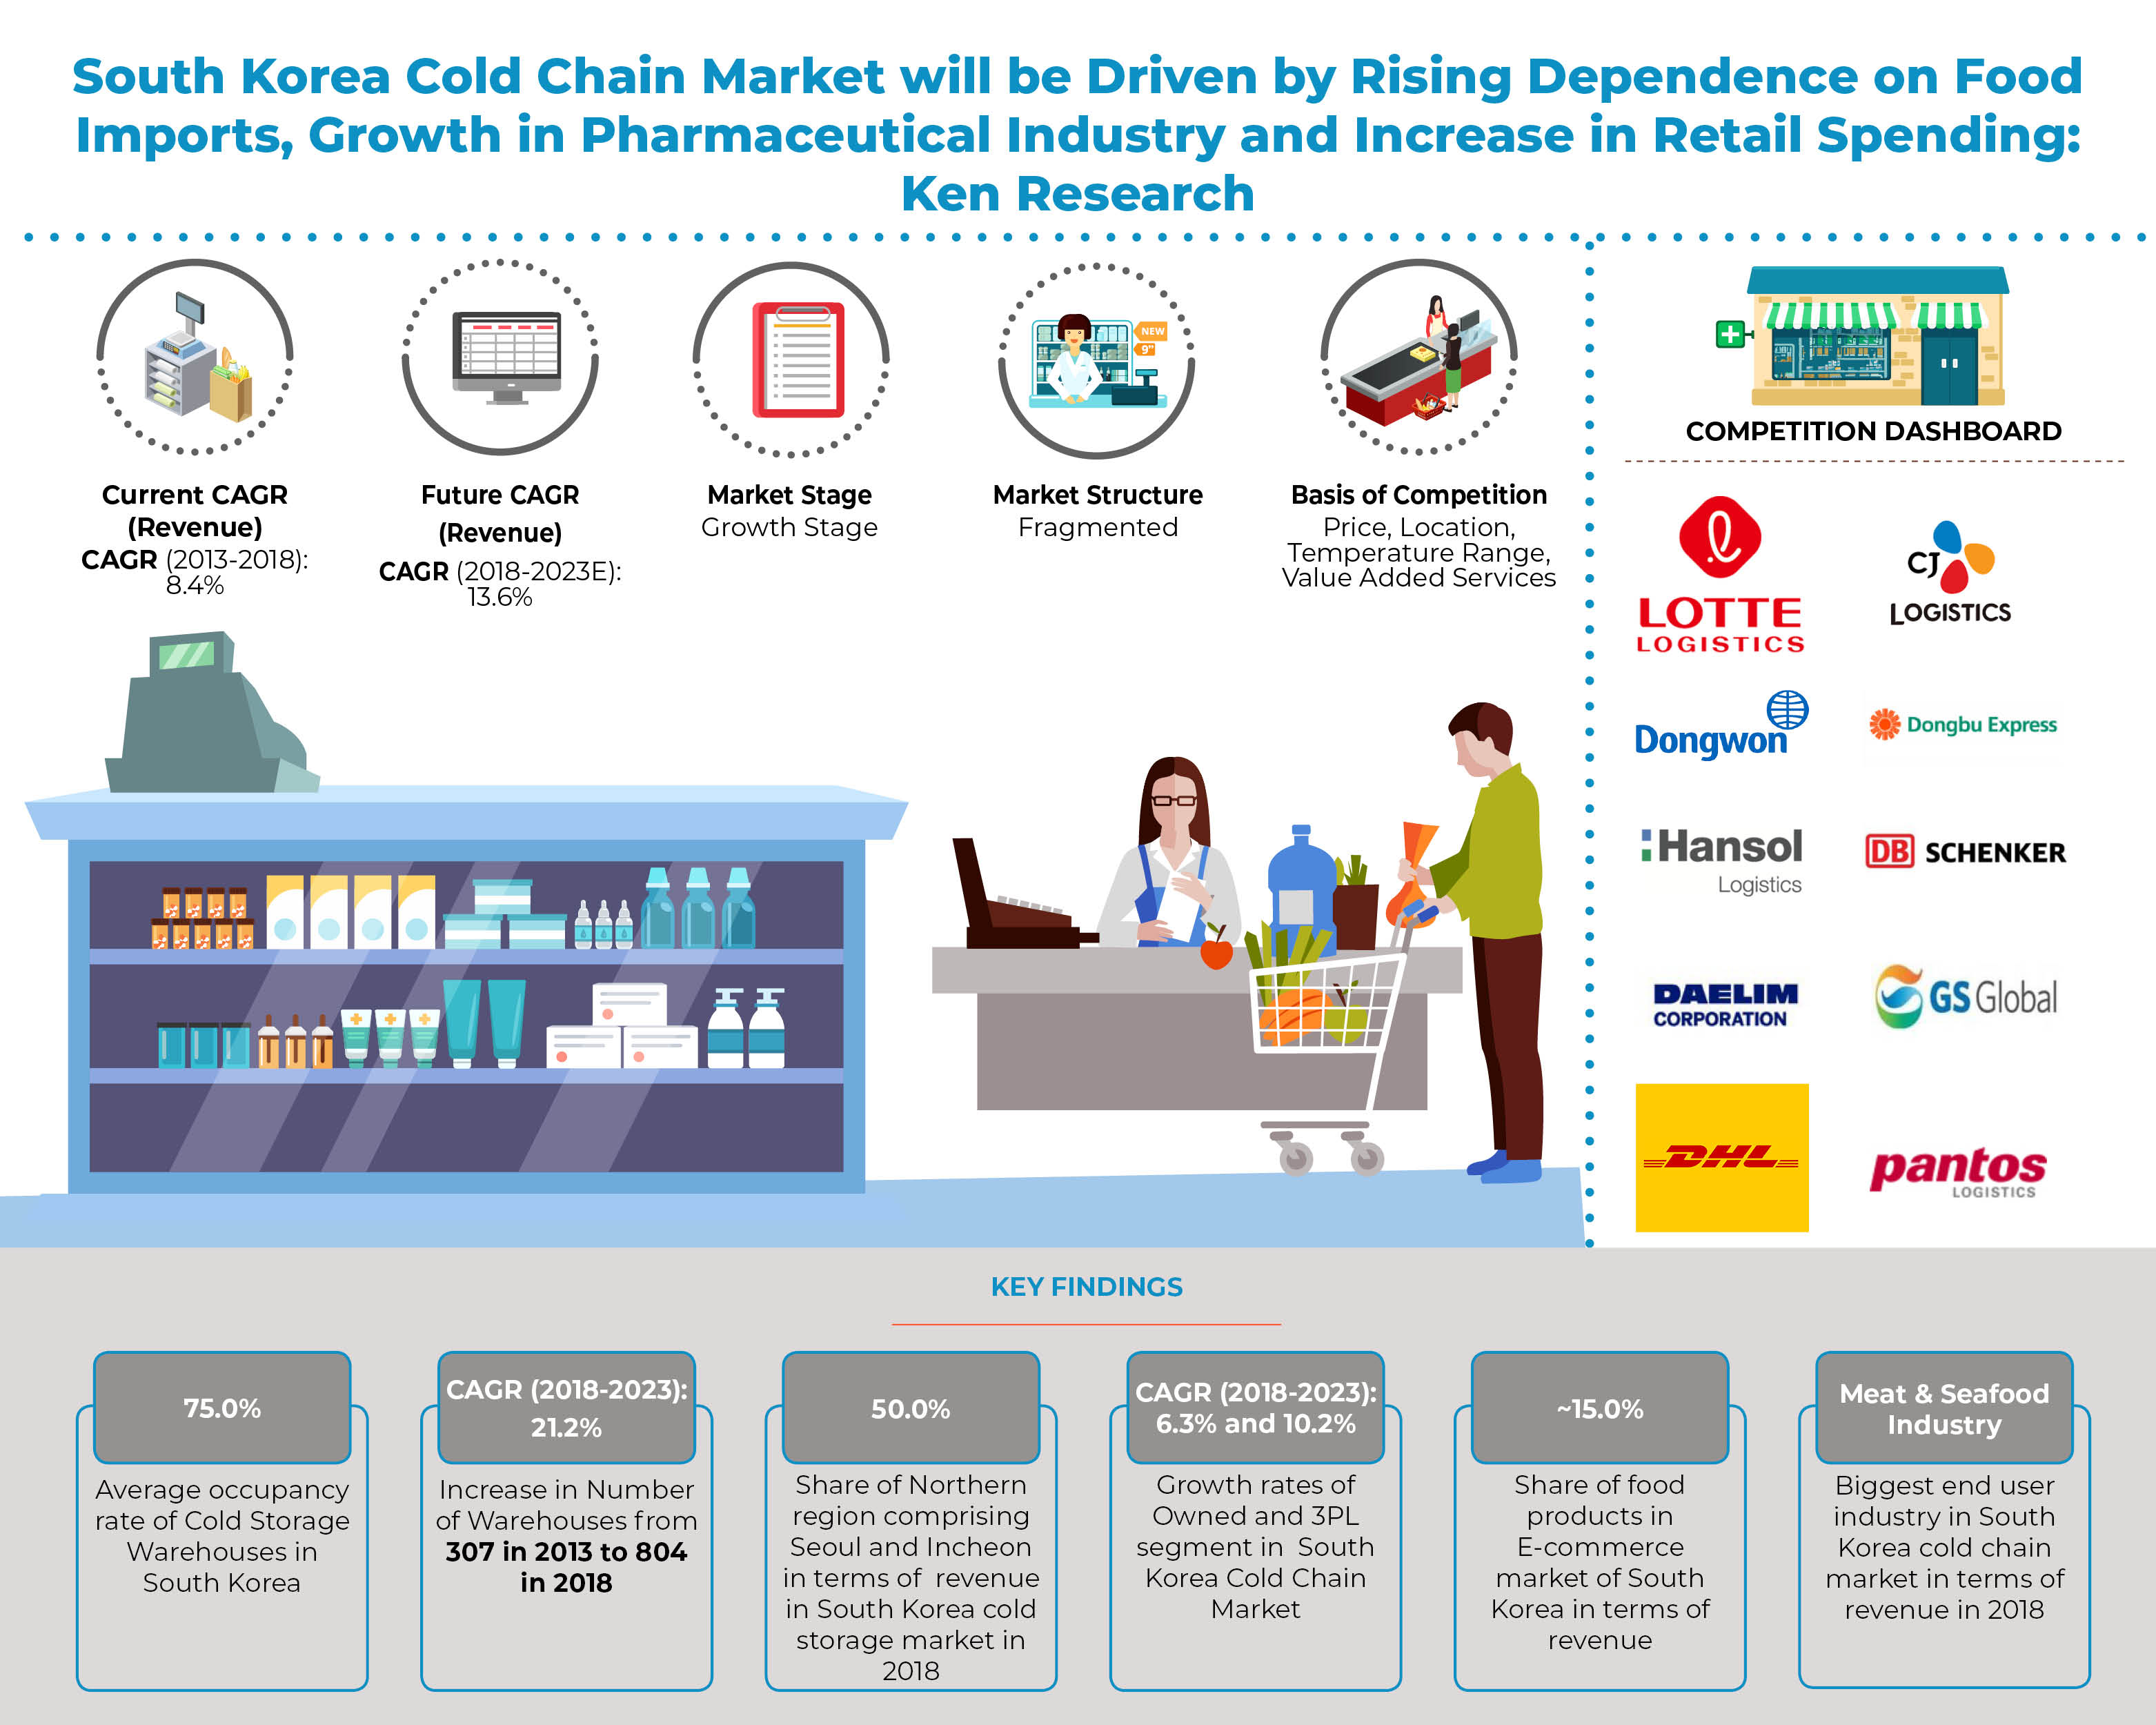 South Korea Cold Chain Market Outlook to 2023: Ken Research